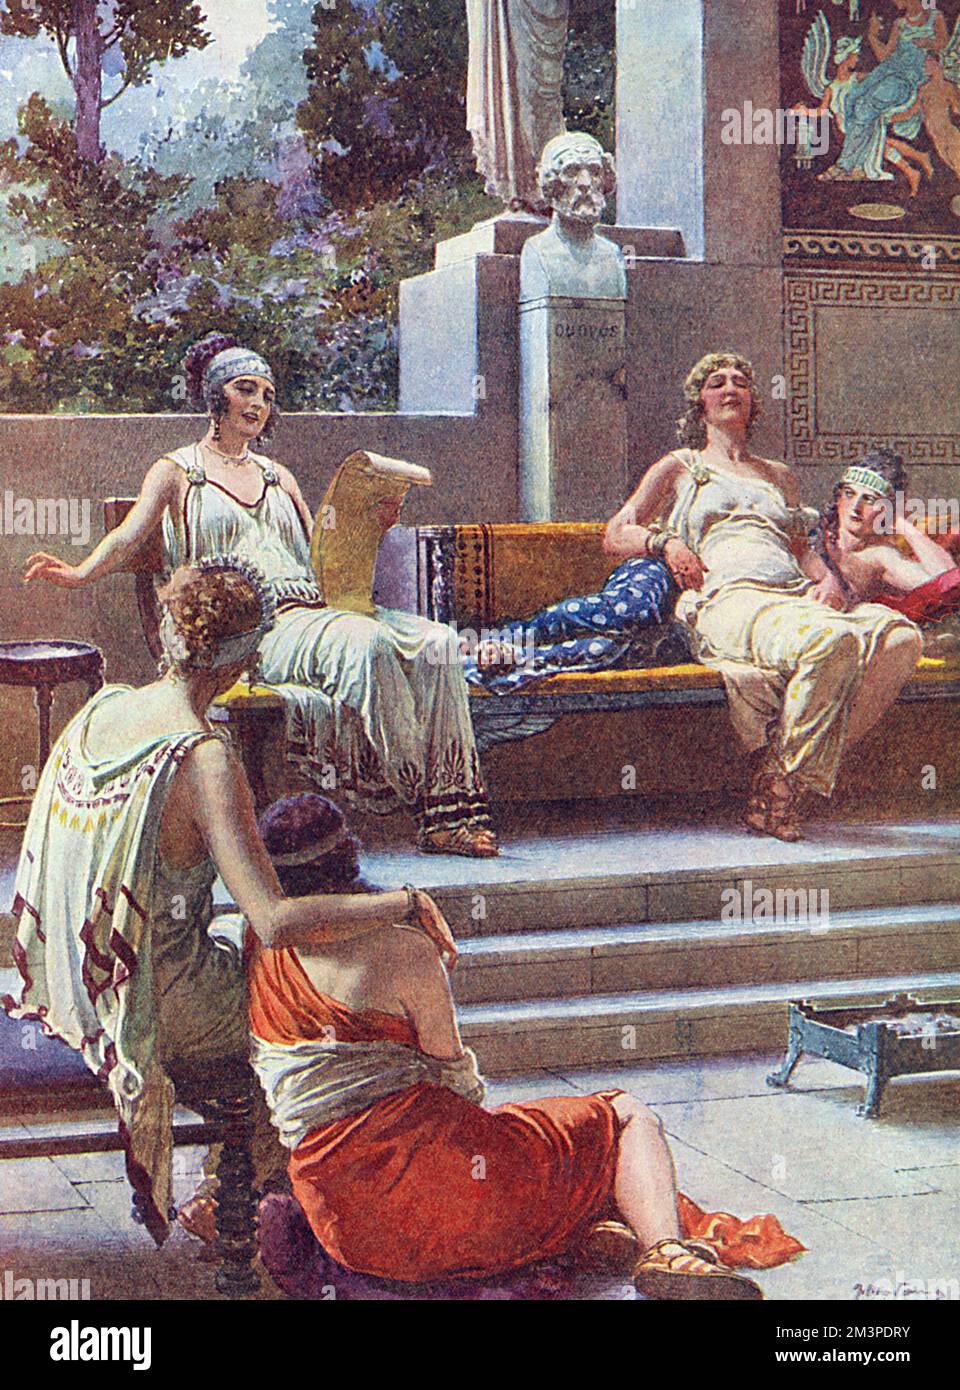 Atthis, Telesippa, Megara, Anactoria and Euneica sitting at the feet of the poetess Sappho as she recites some of her work.  No. 5 in a series on Famous Women from History written by Kenneth Bell and illustrated by Fortunino Matania in Britannia and Eve.       Date: BC Stock Photo